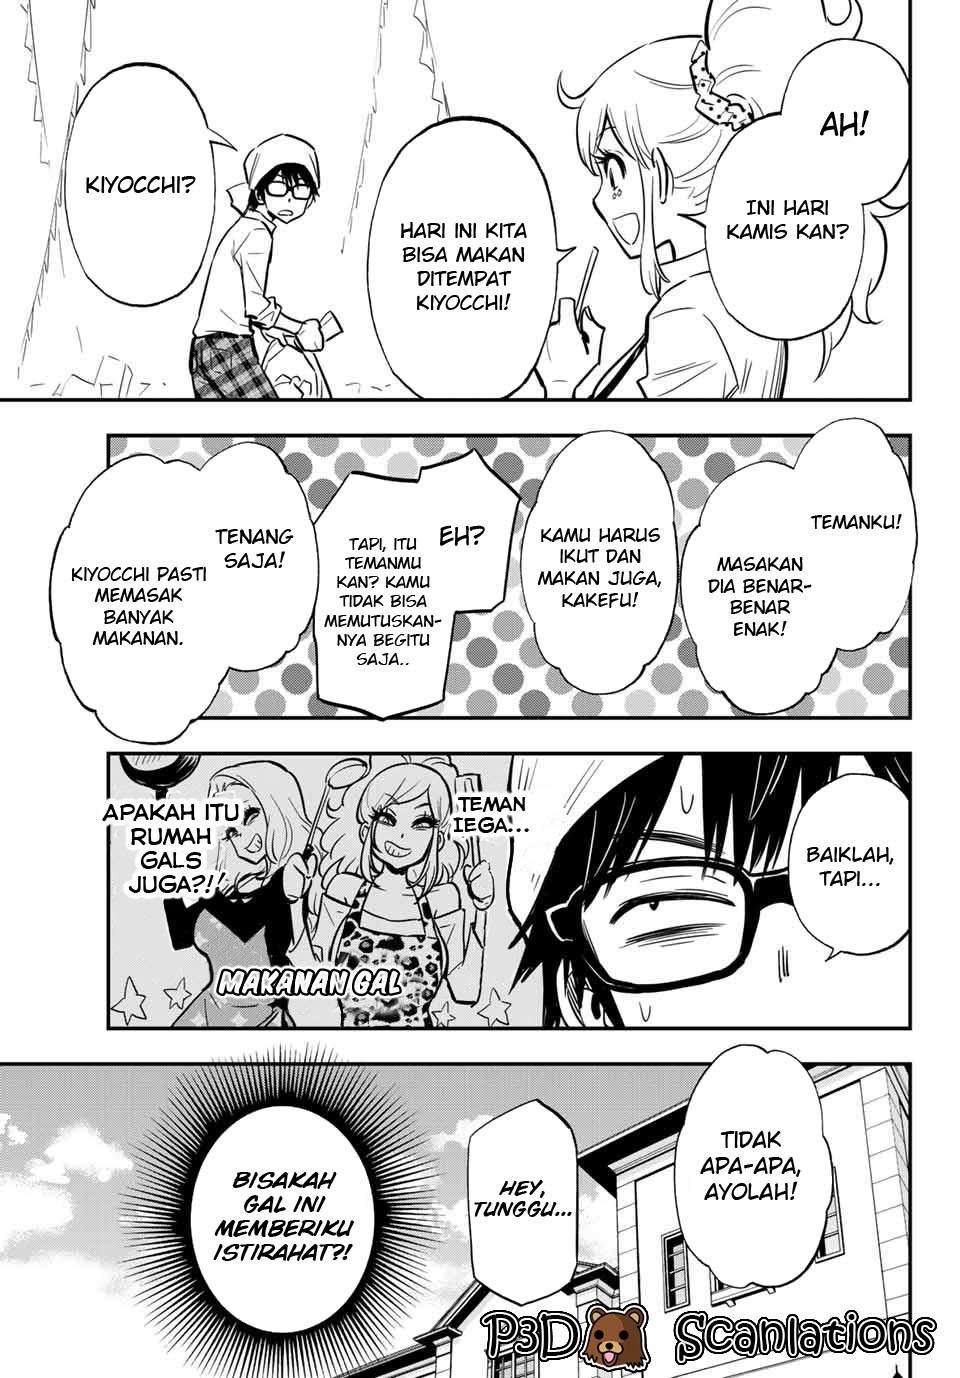 Gal☆Cleaning! Chapter 5